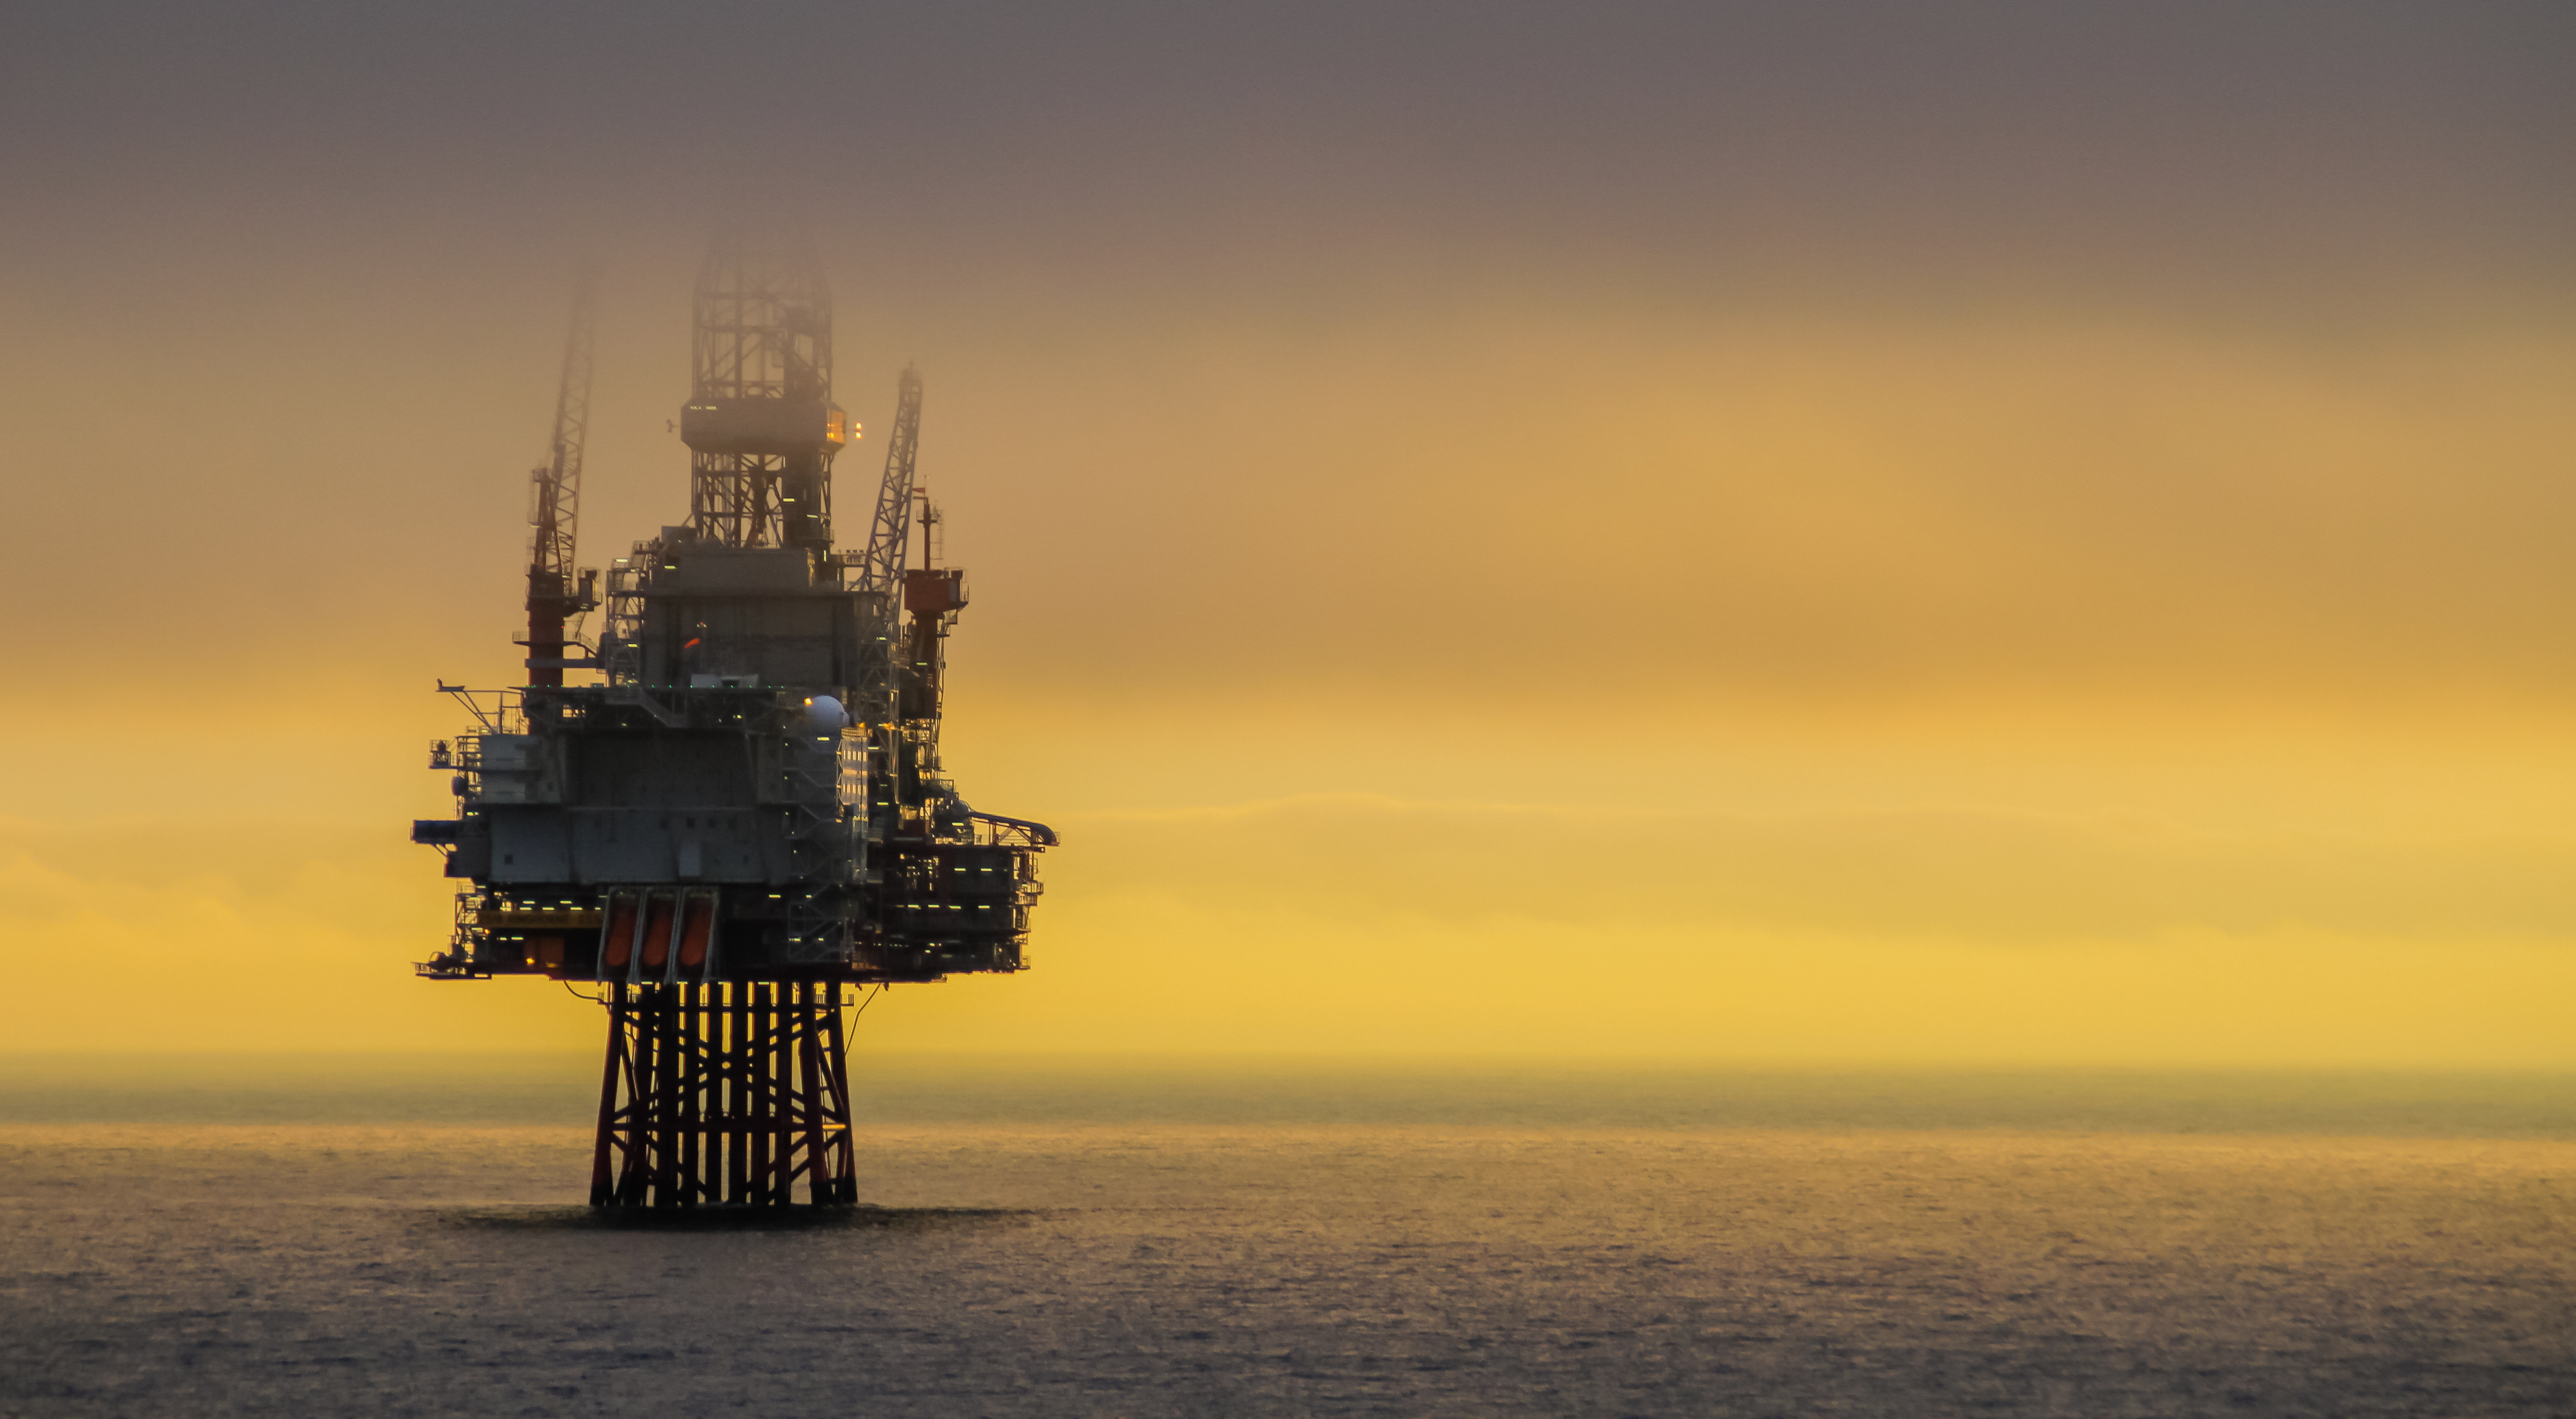 Coping with weather-related safety risks for oil rigs in the North Sea